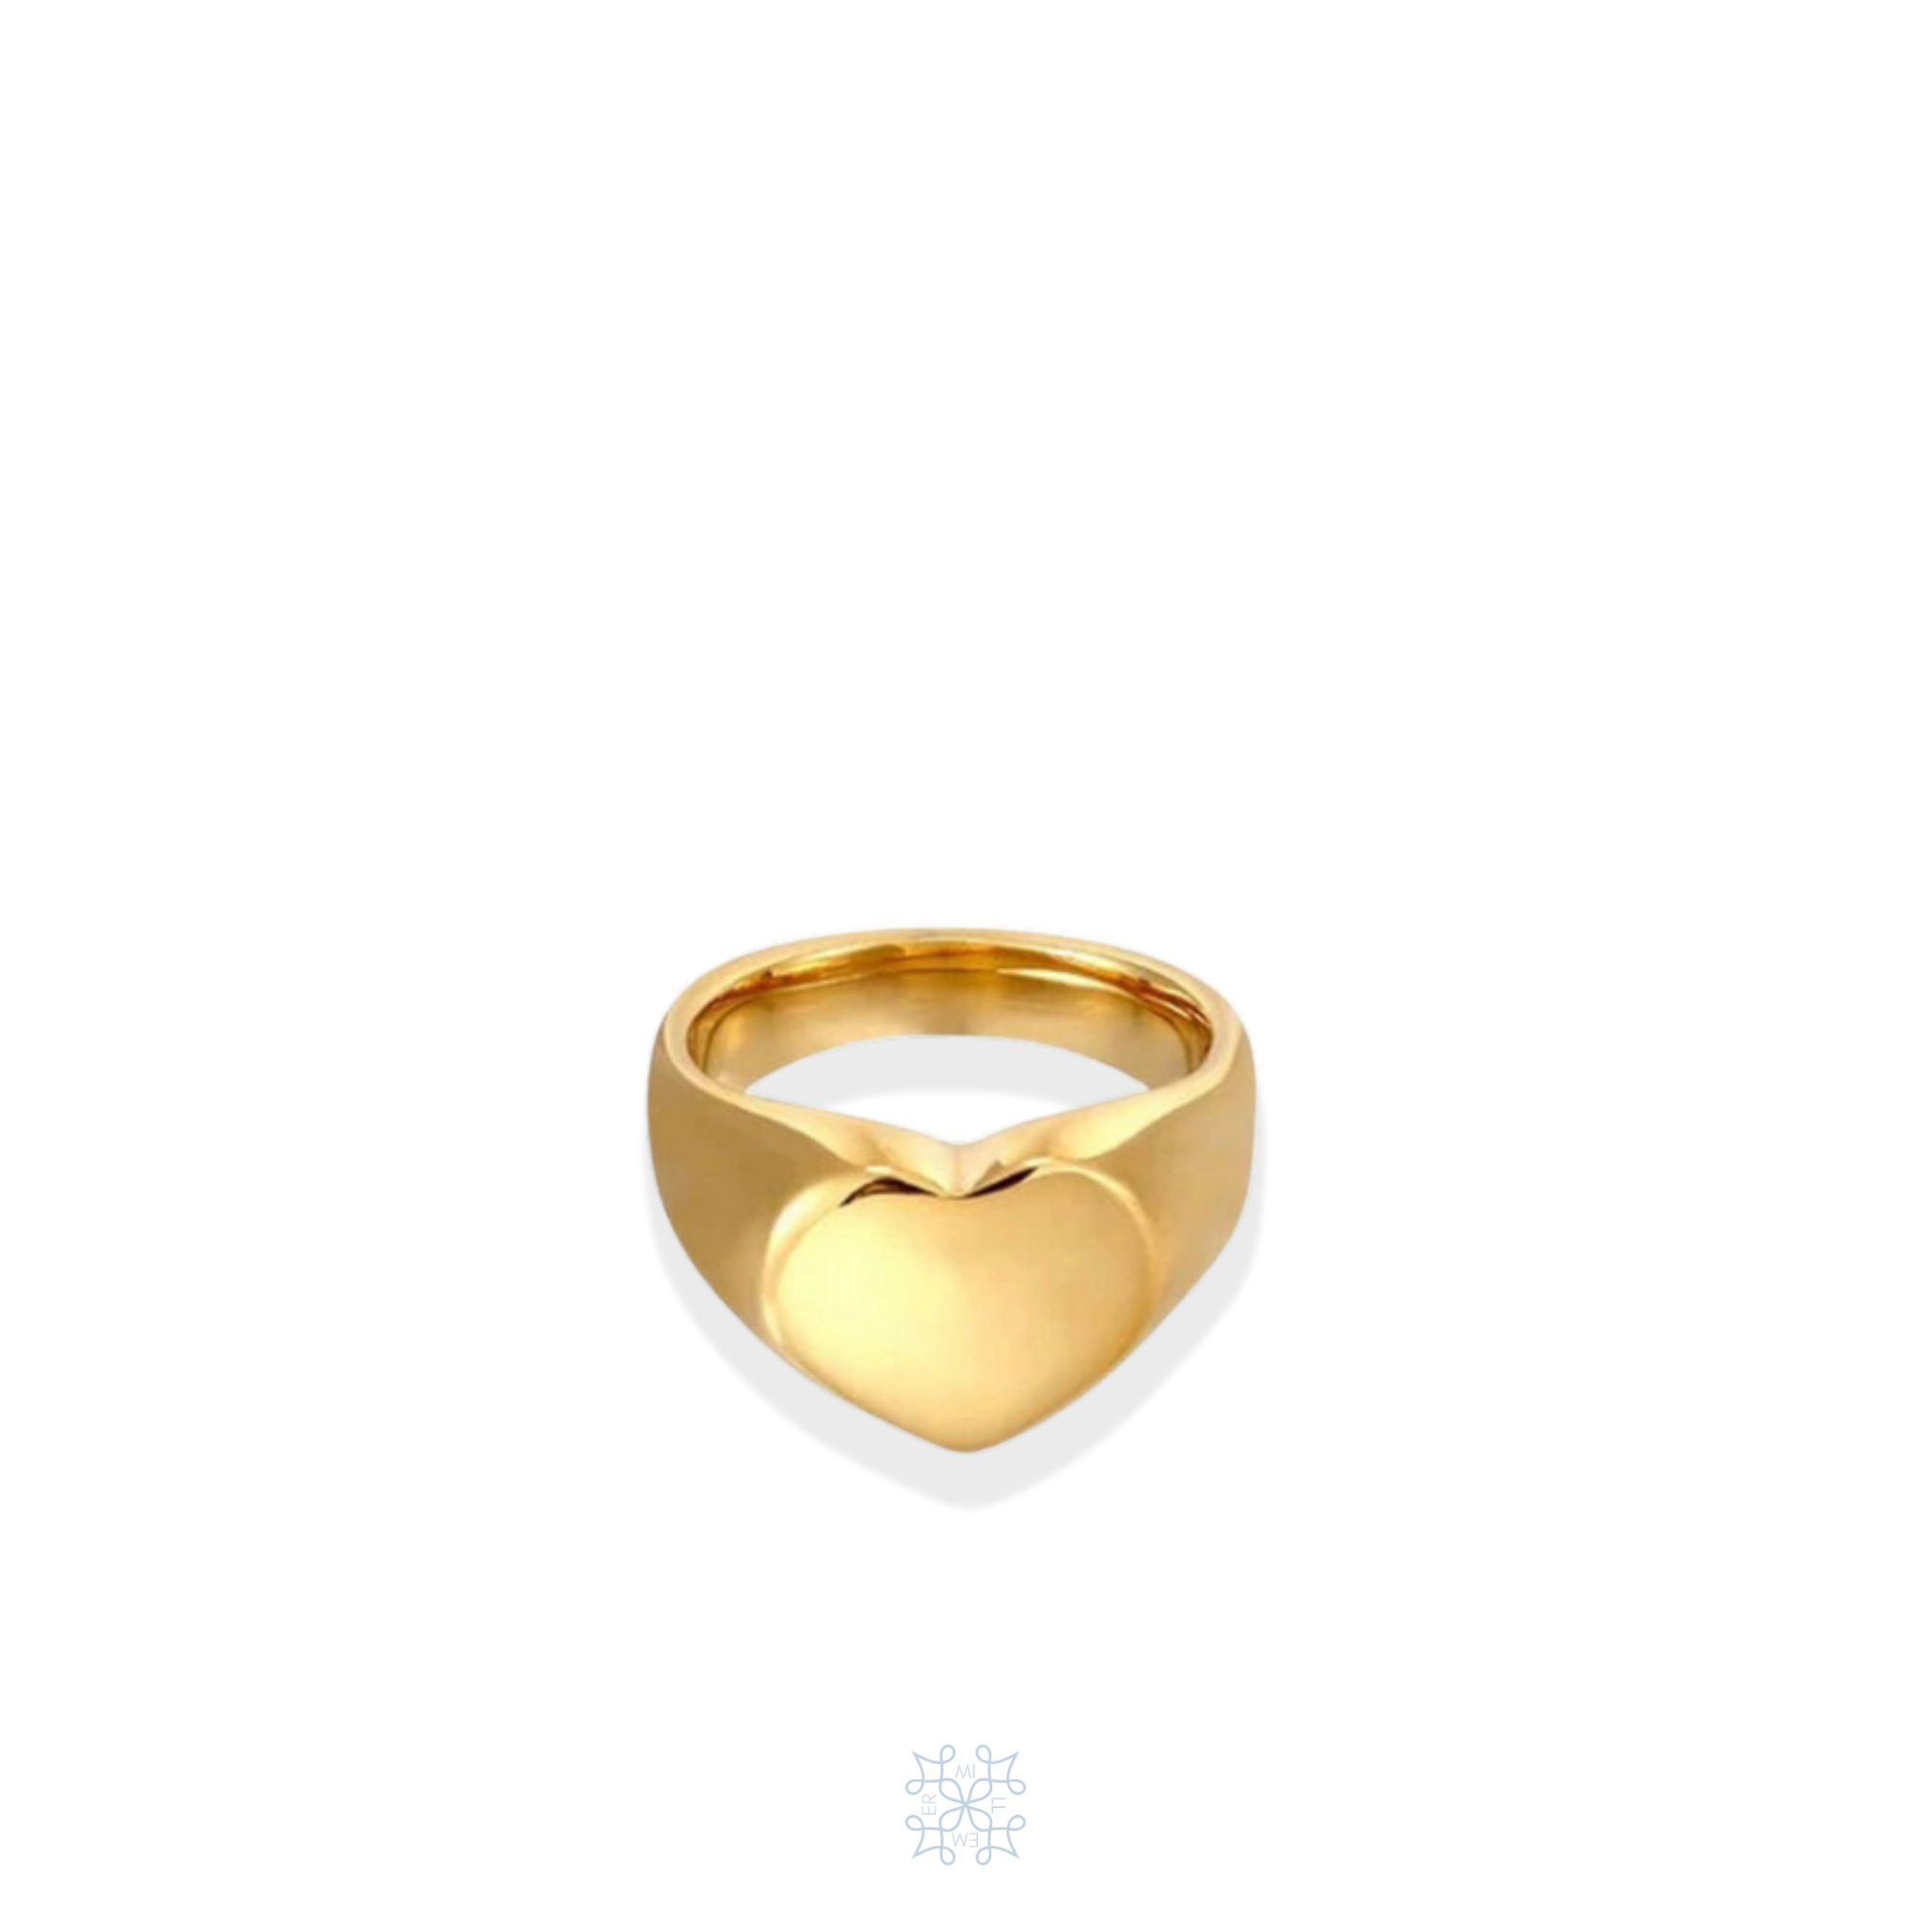 Gold Ring with heart shape in the centre. 